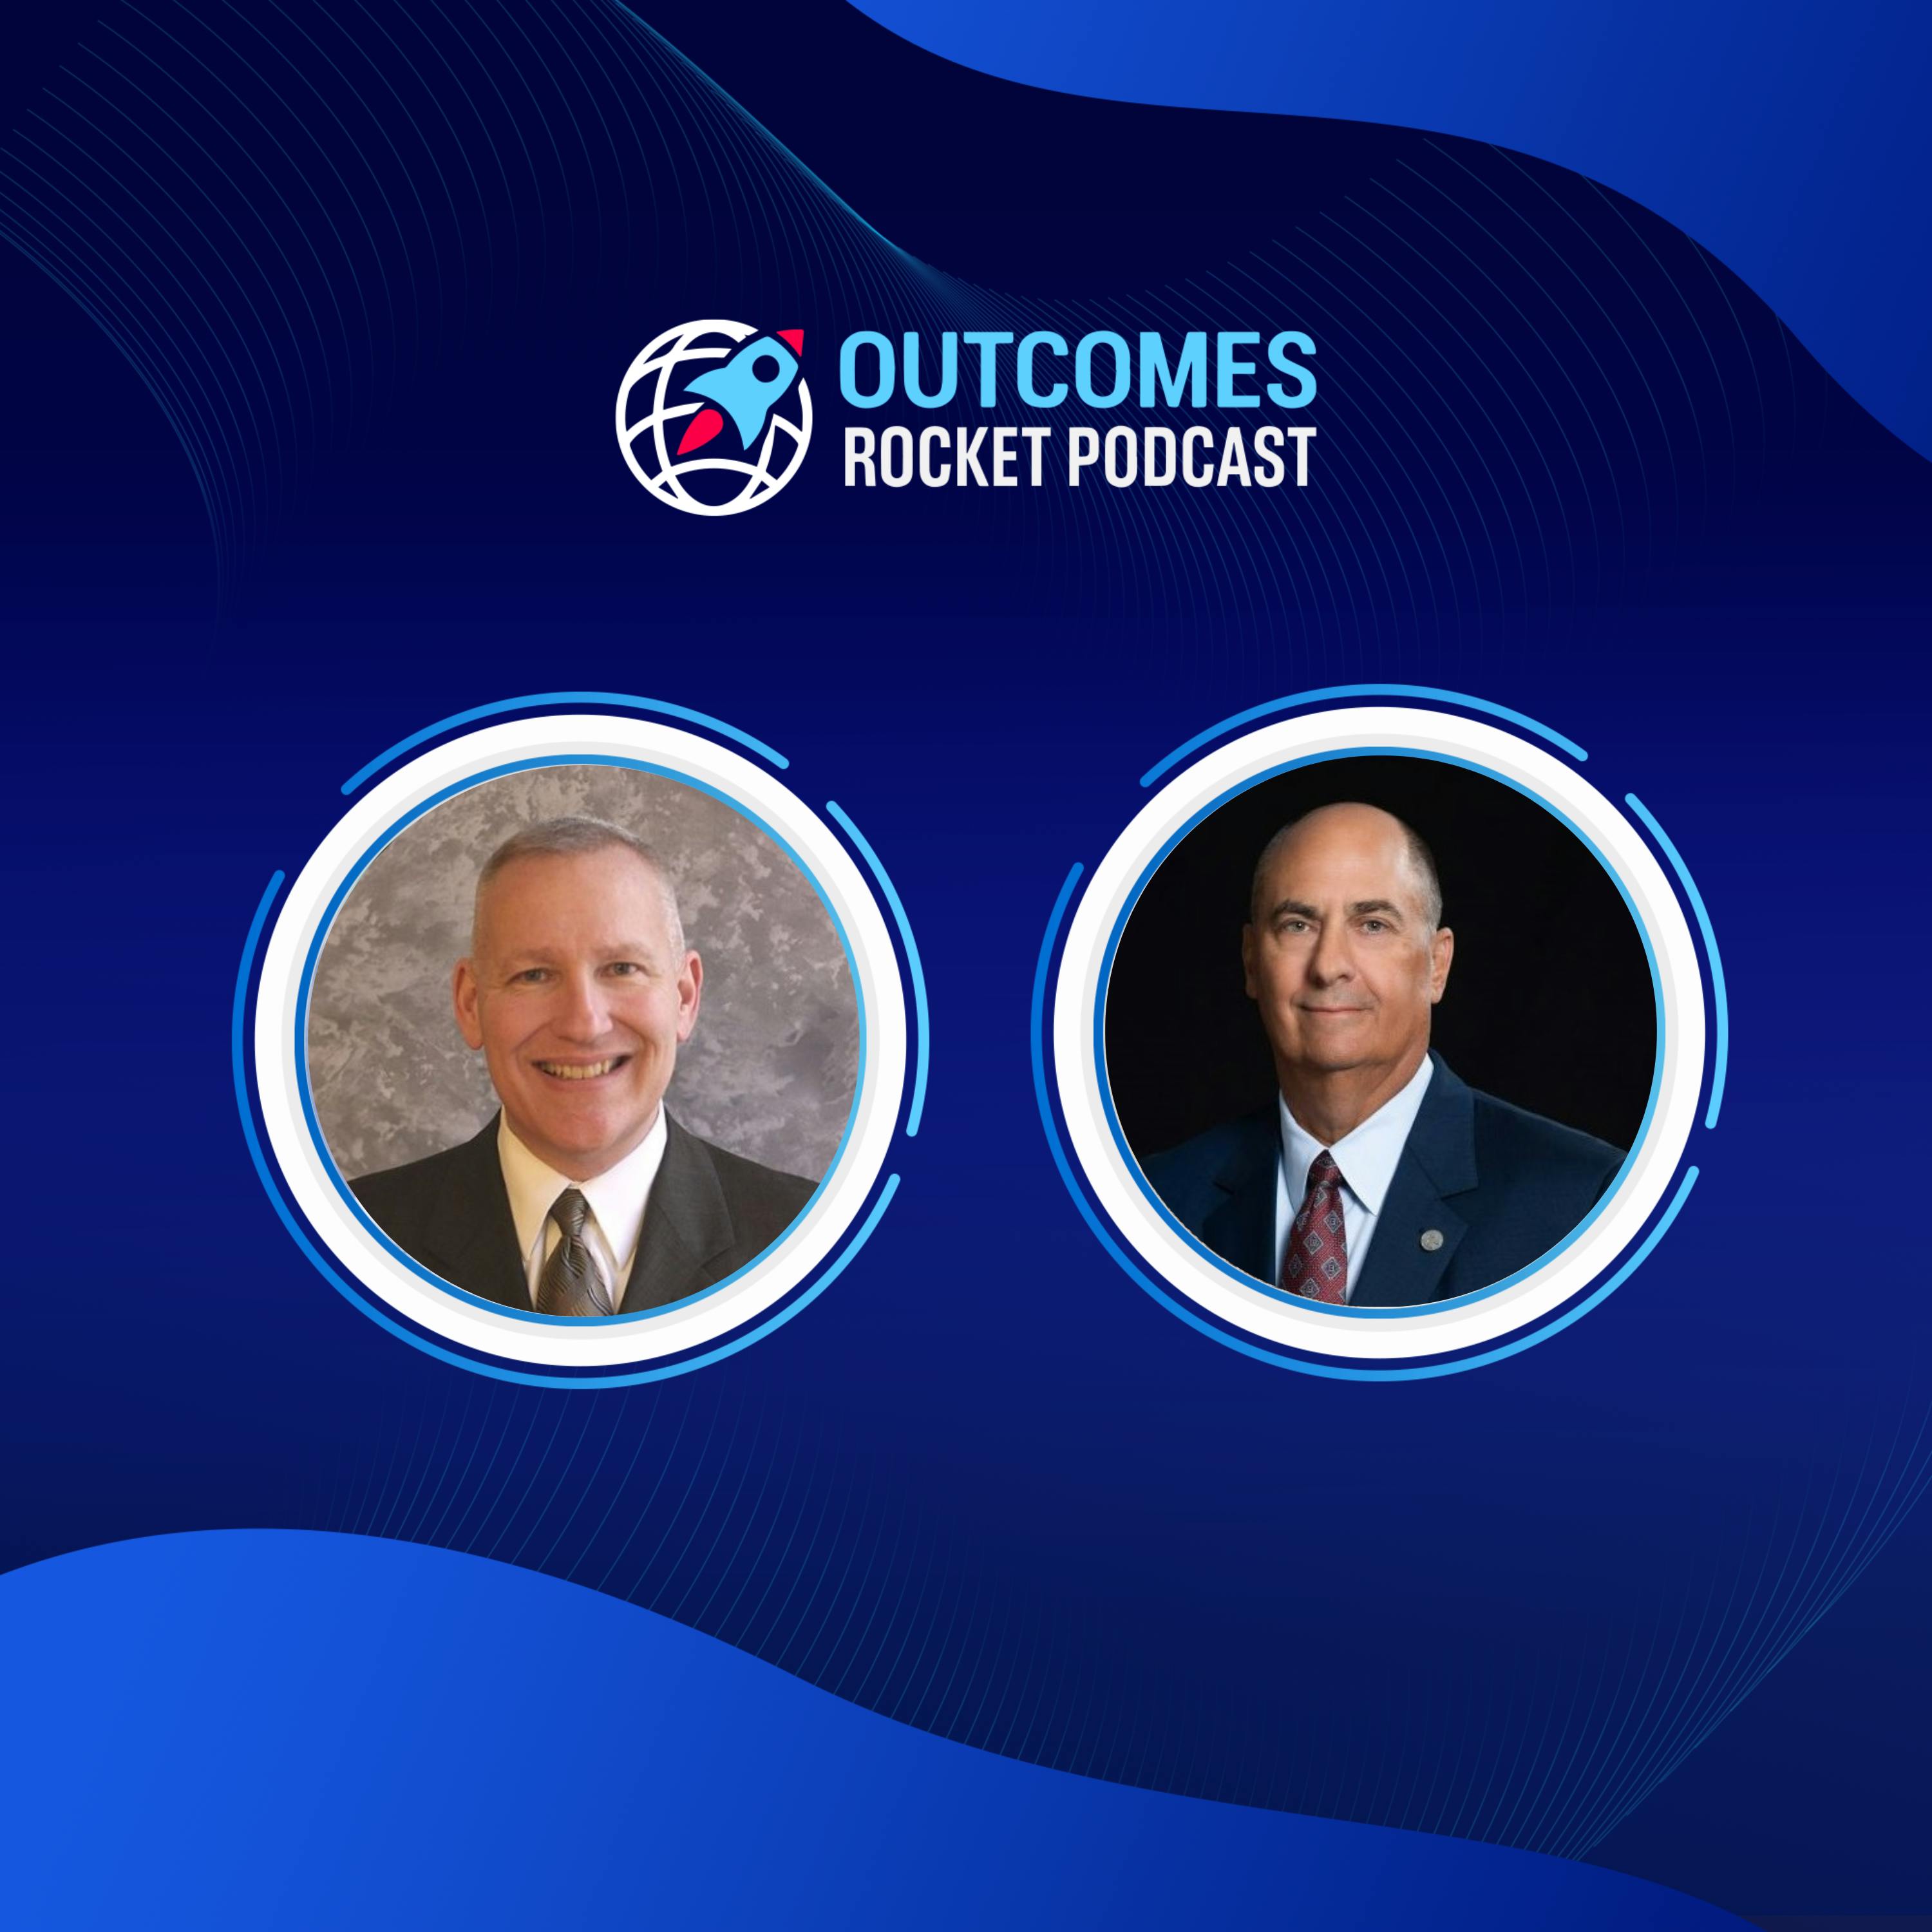 Exploring Threat Assessment Strategies in Healthcare Settings with Randy Stephan, Vice President for Security, and Mark Concordia, Executive Director for Workforce Violence Prevention, at Advocate Health